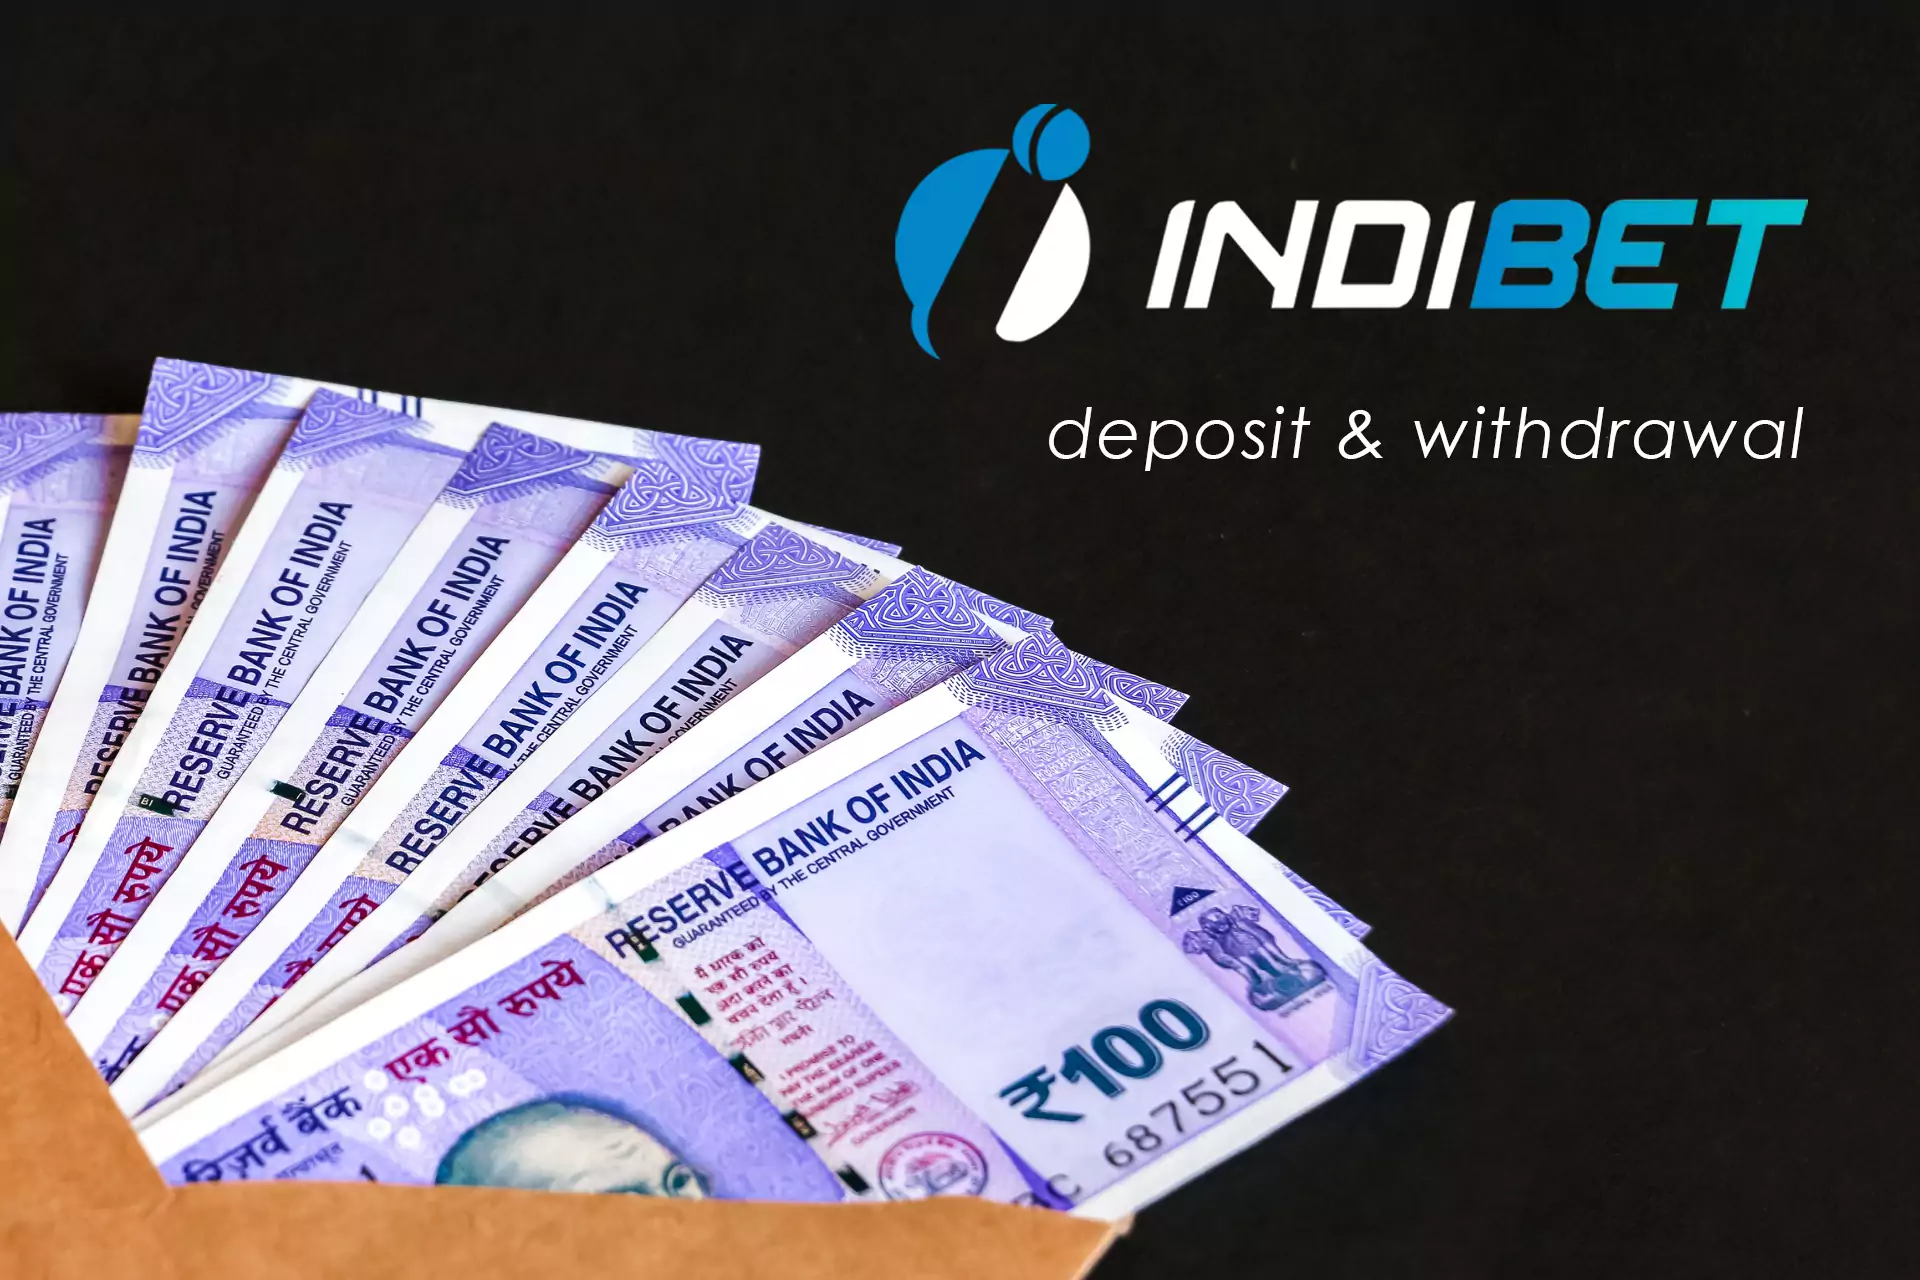 You can top up your account and withdraw funds from it in INR.